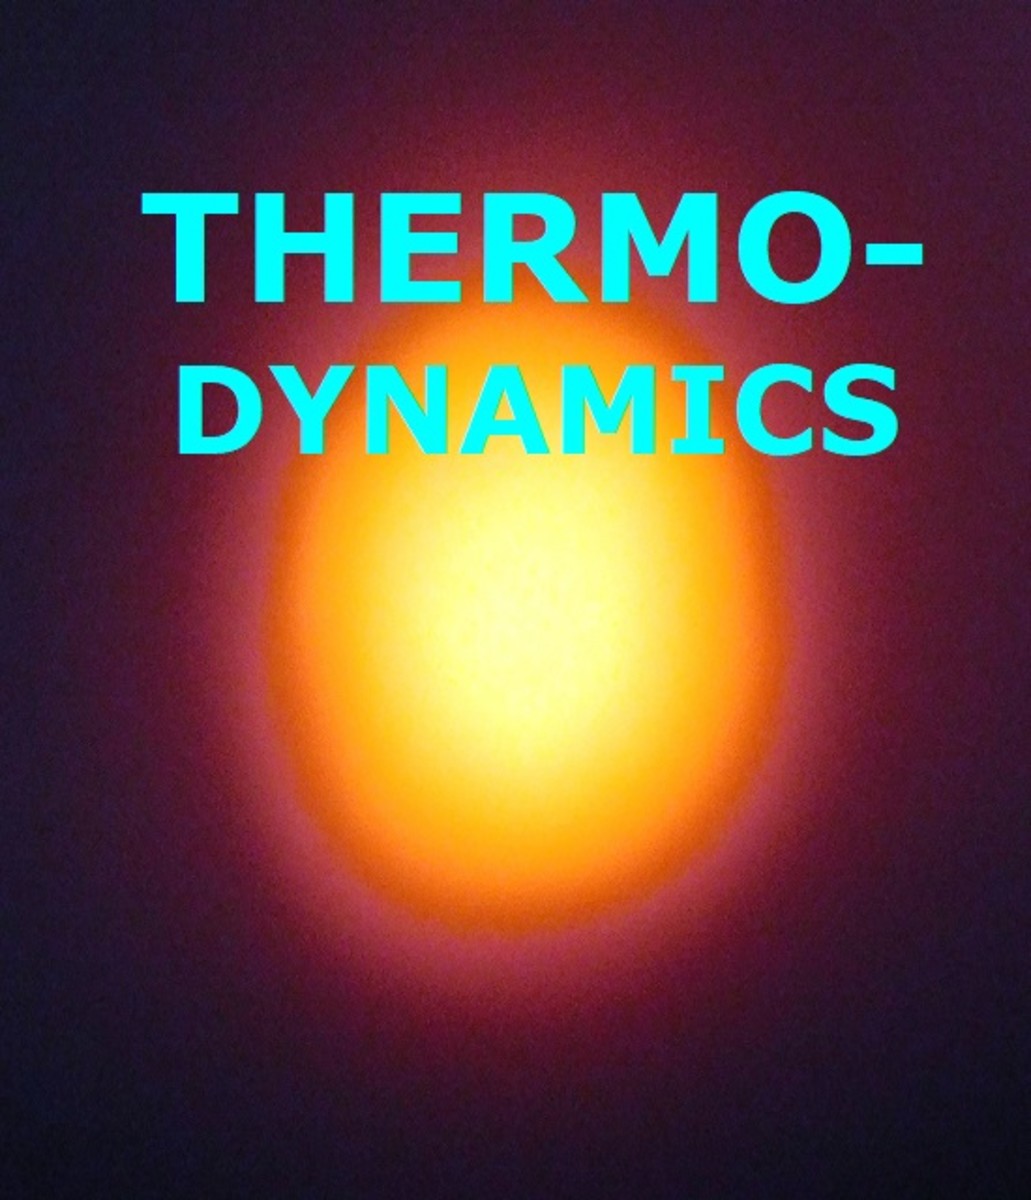 What is Thermodynamics?